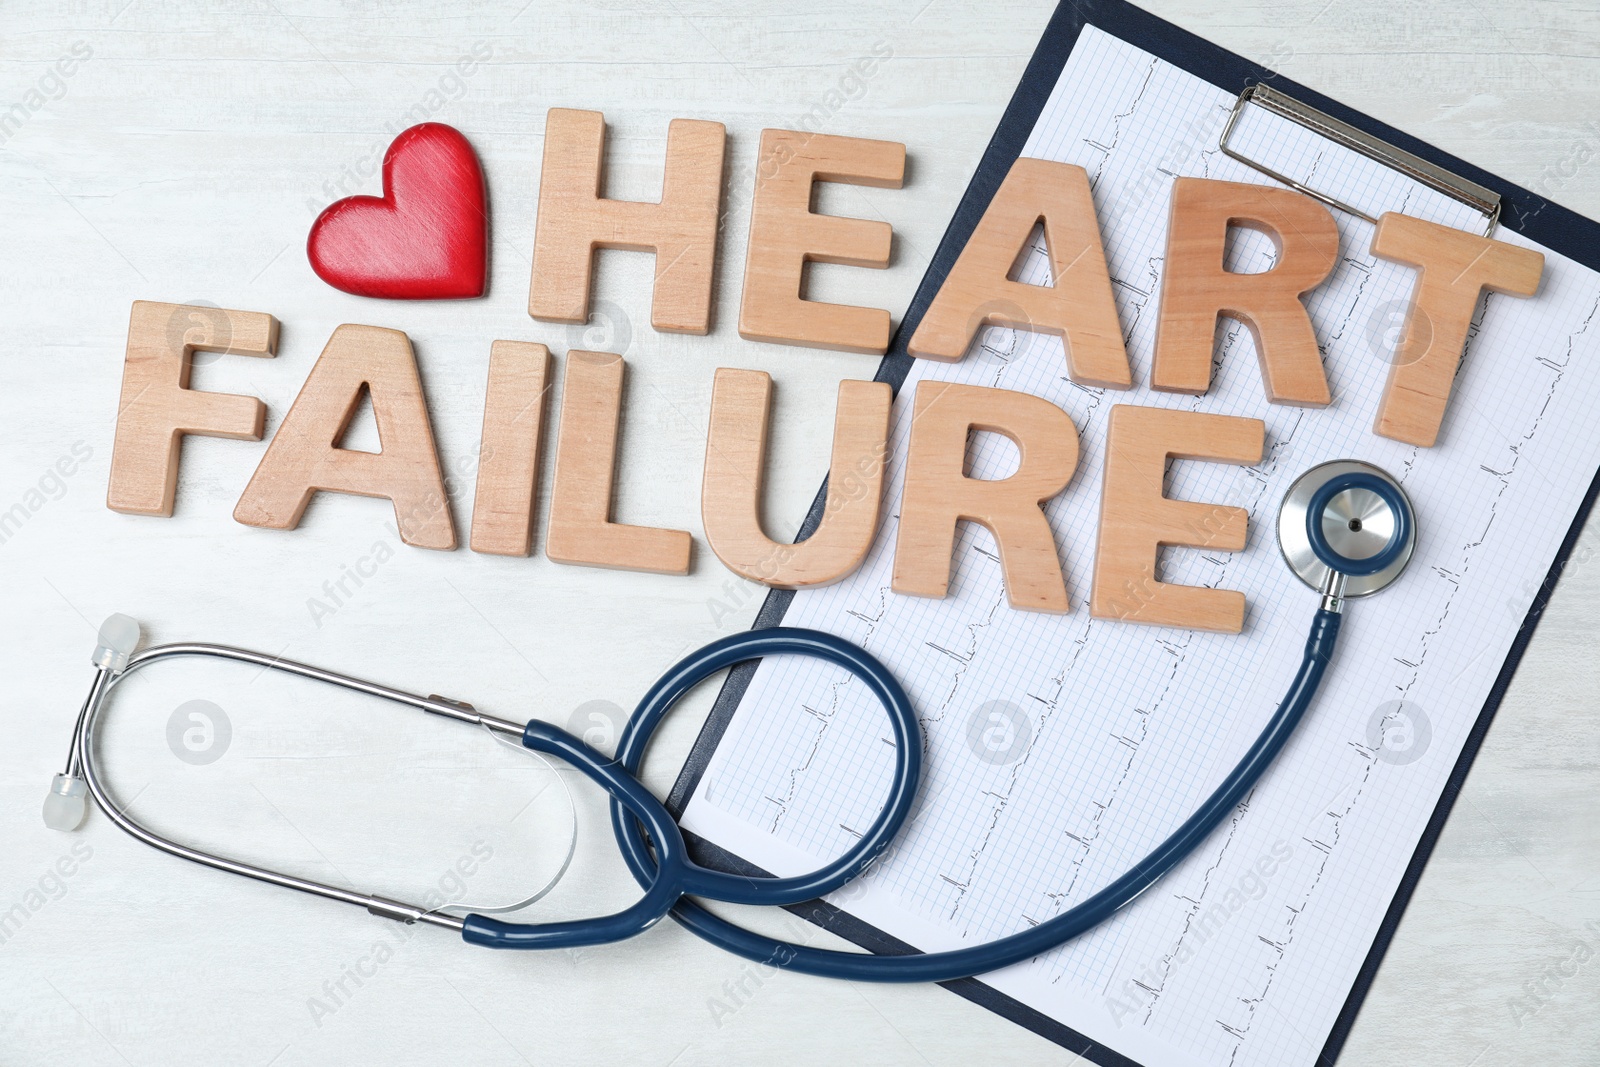 Photo of Text Heart Failure with stethoscope and cardiogram on light background, flat lay